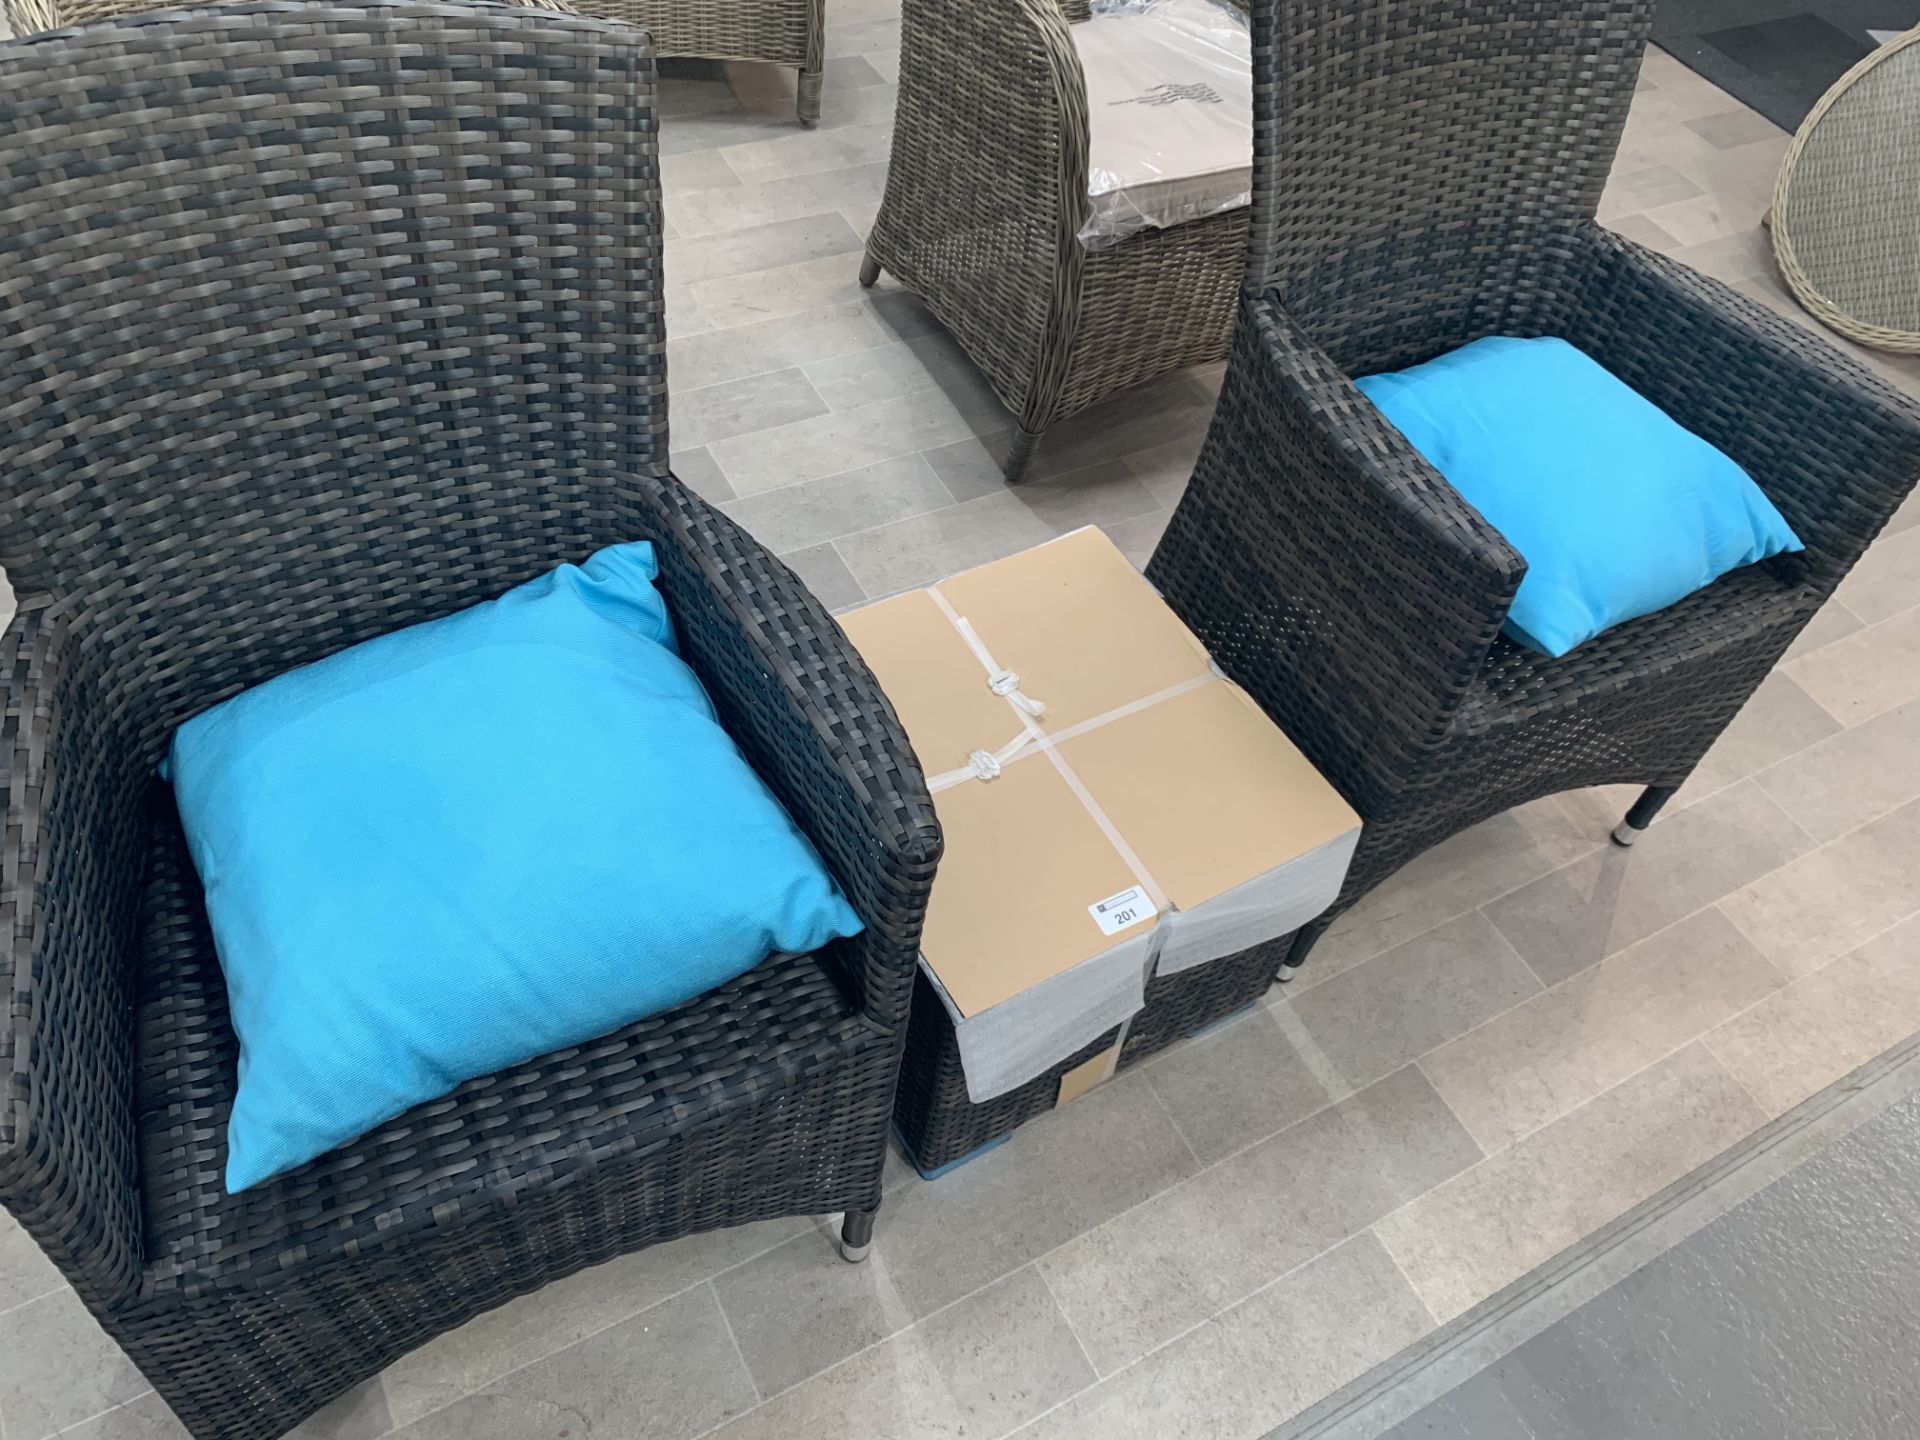 A Pair of Maze Rattan Cushion Arm chairs with matching glass top table